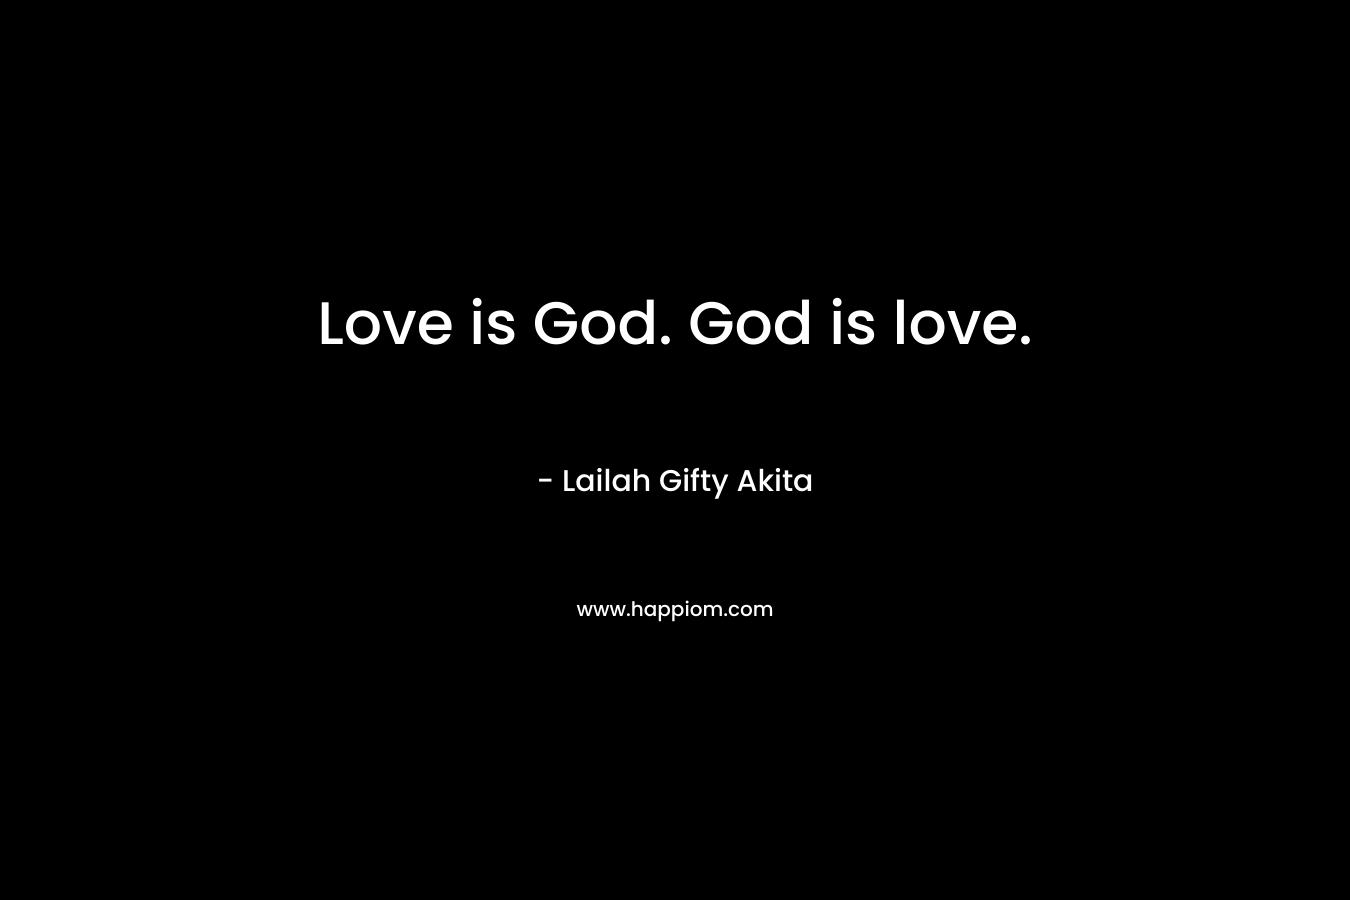 Love is God. God is love.